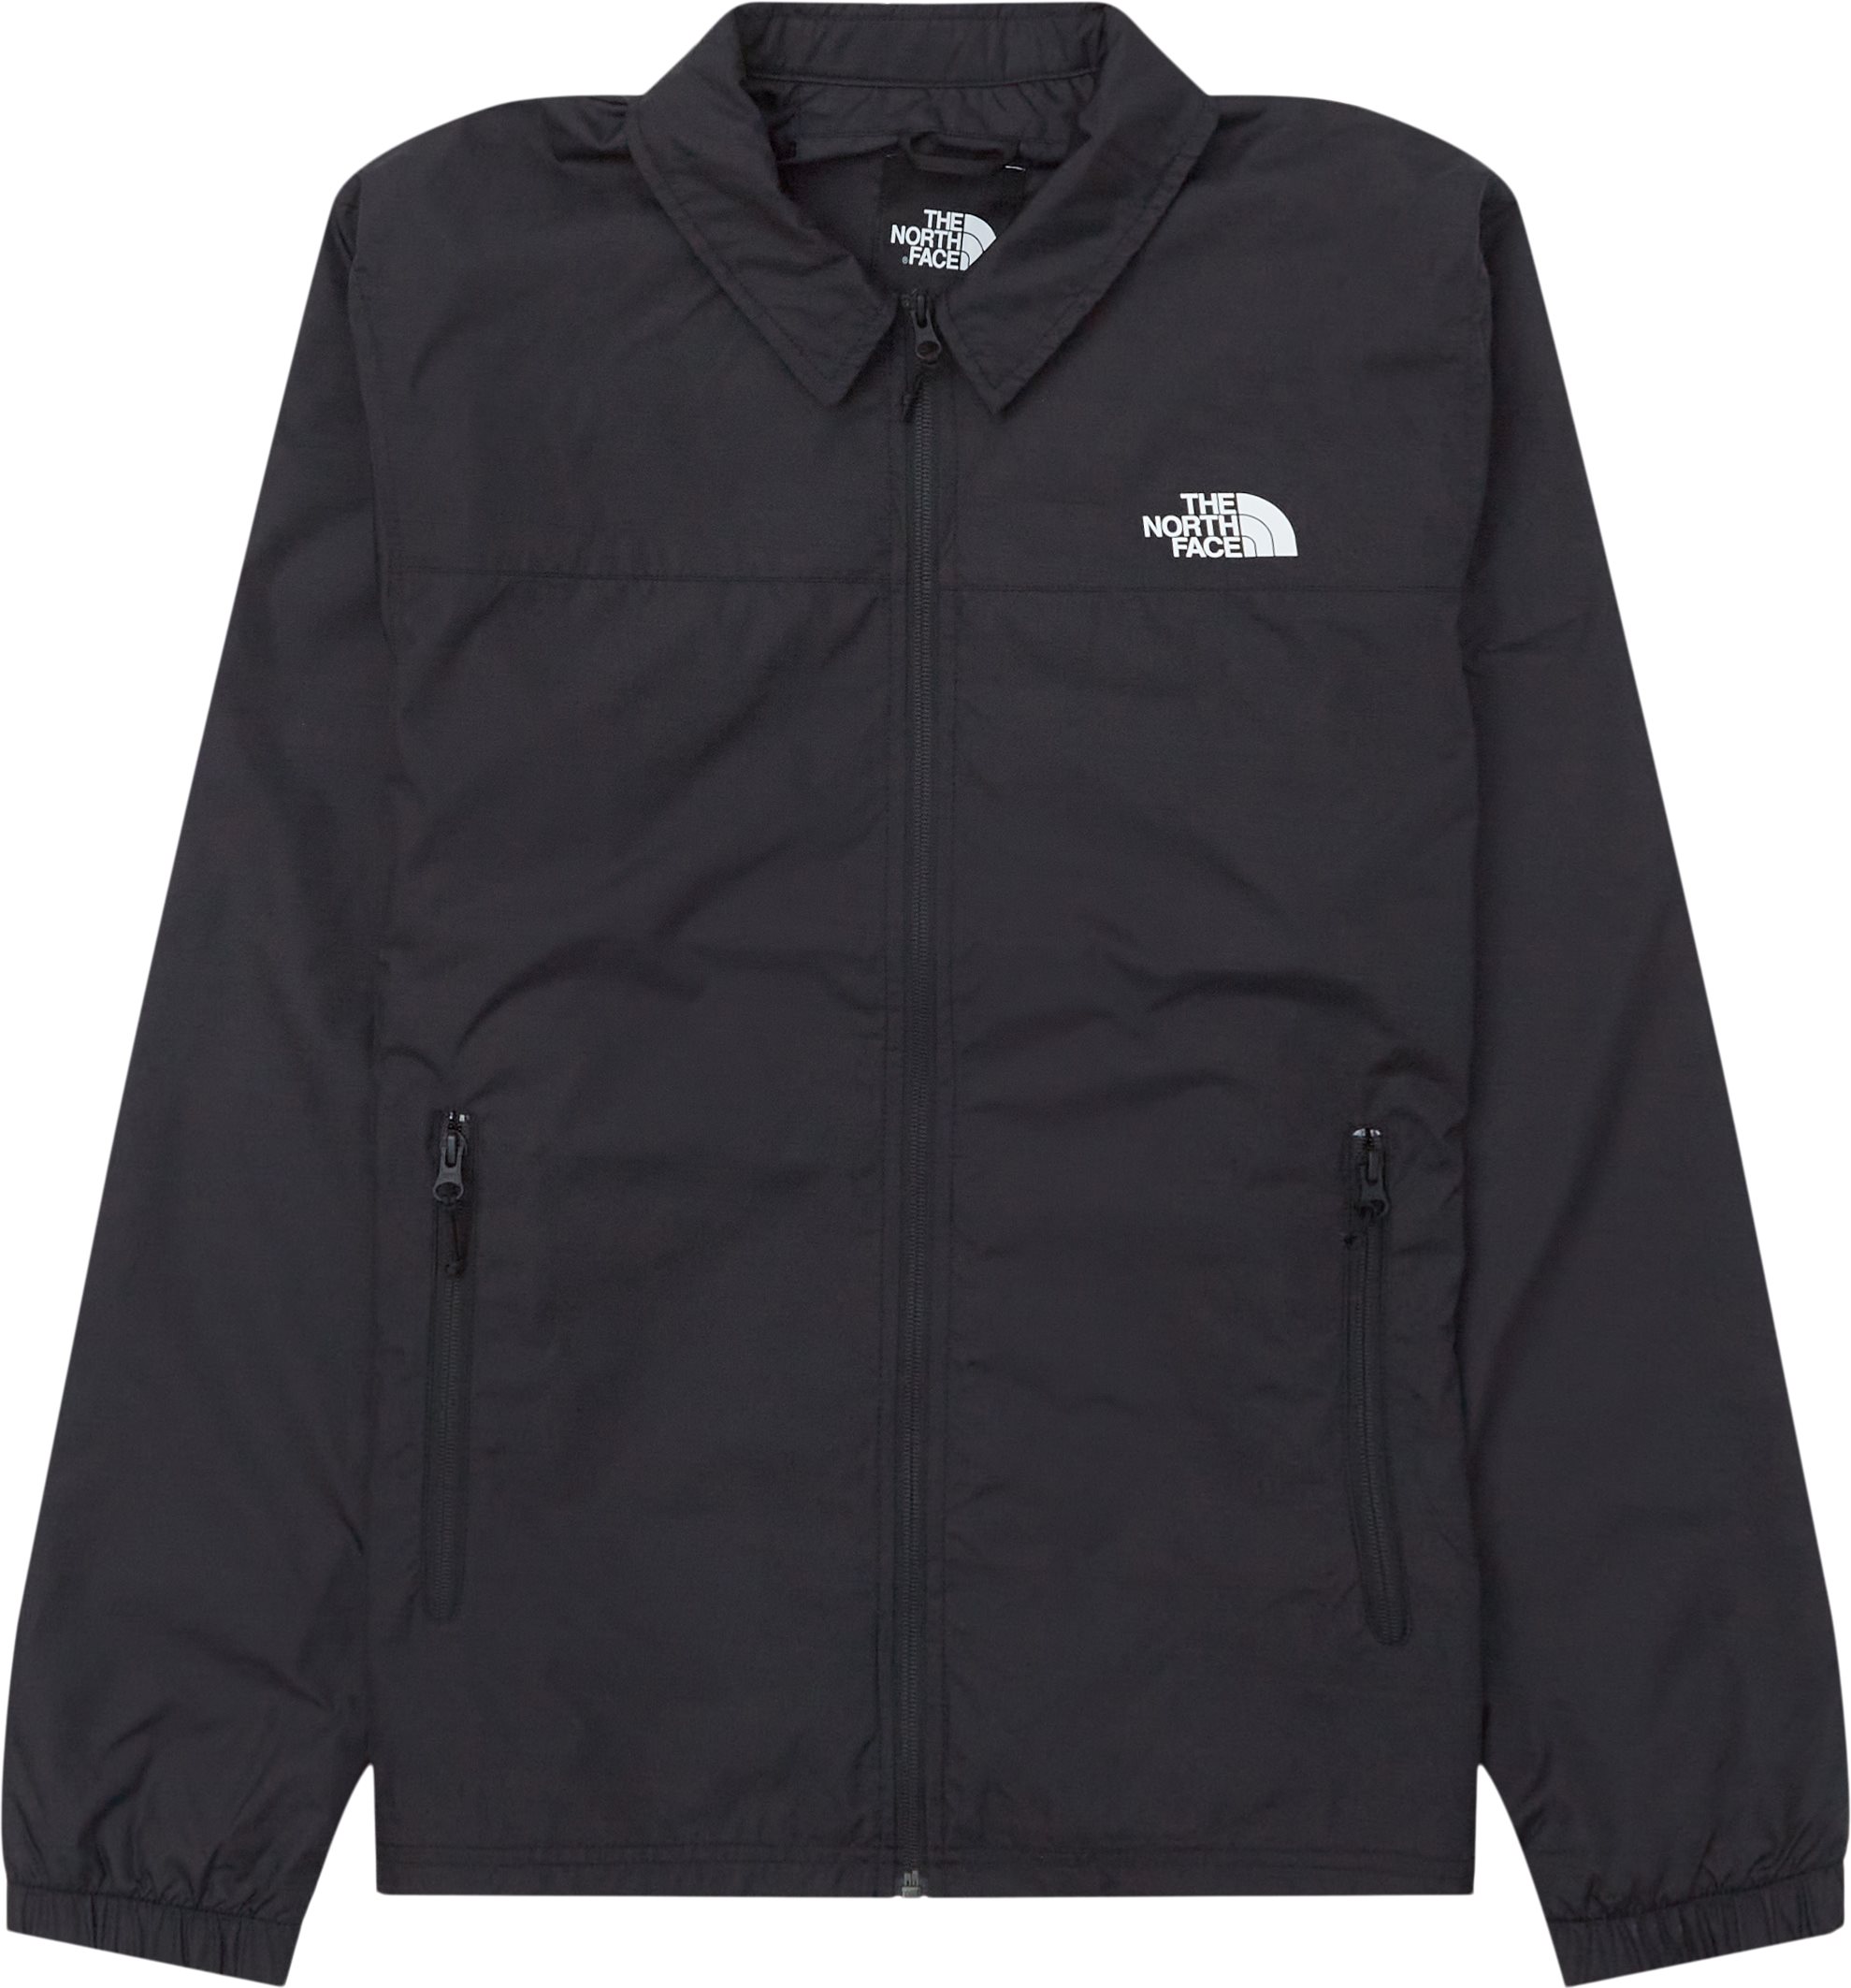 The North Face Jackets CYCLONE COACHES JKT Black